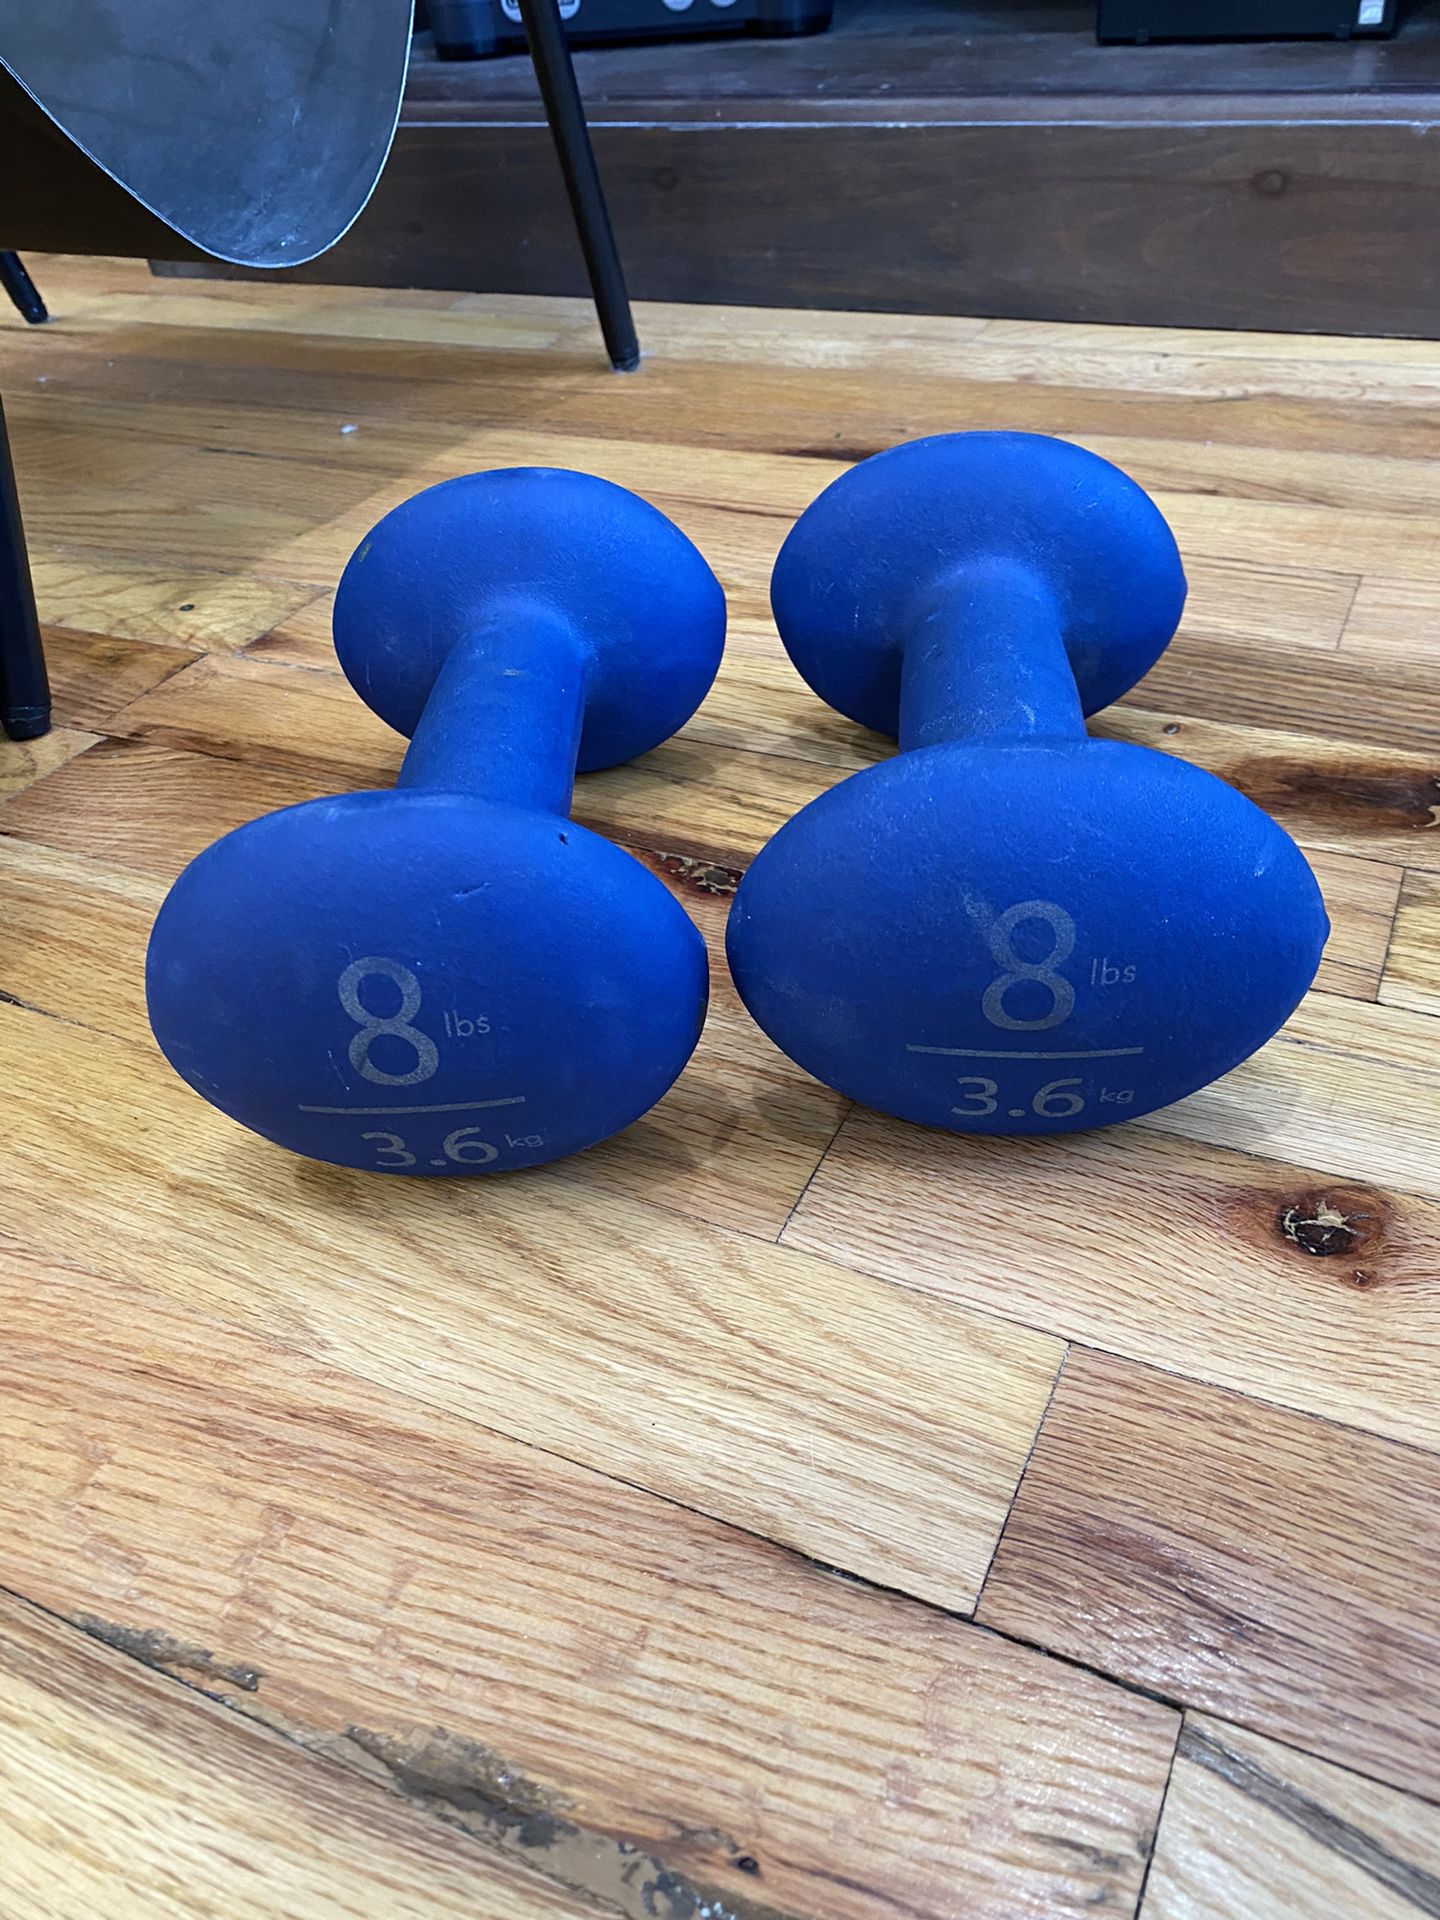 8lb Dumbbell Weights